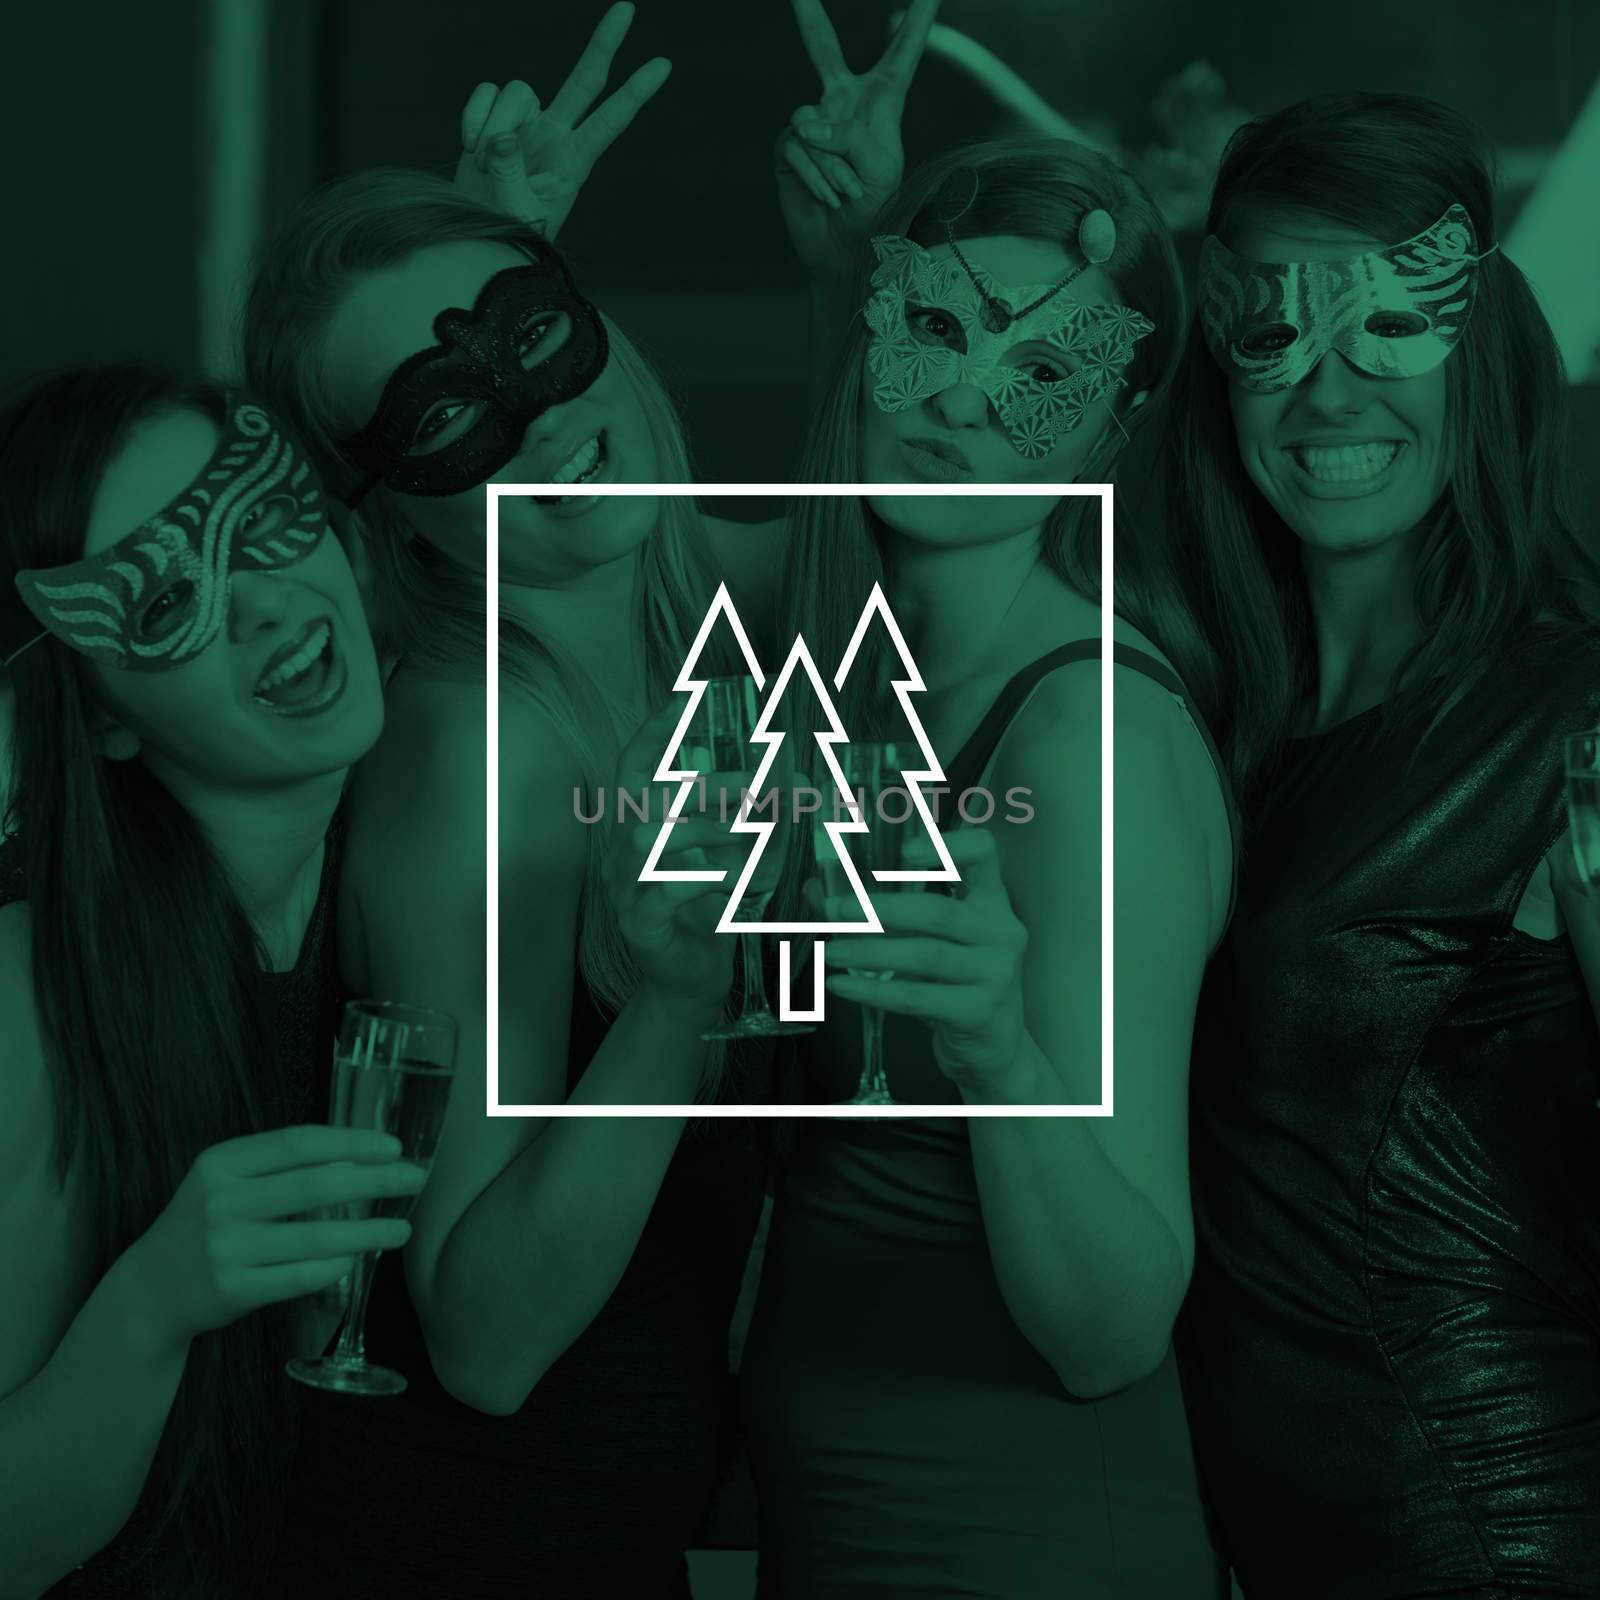 Attractive women wearing masks holding champagne against christmas trees